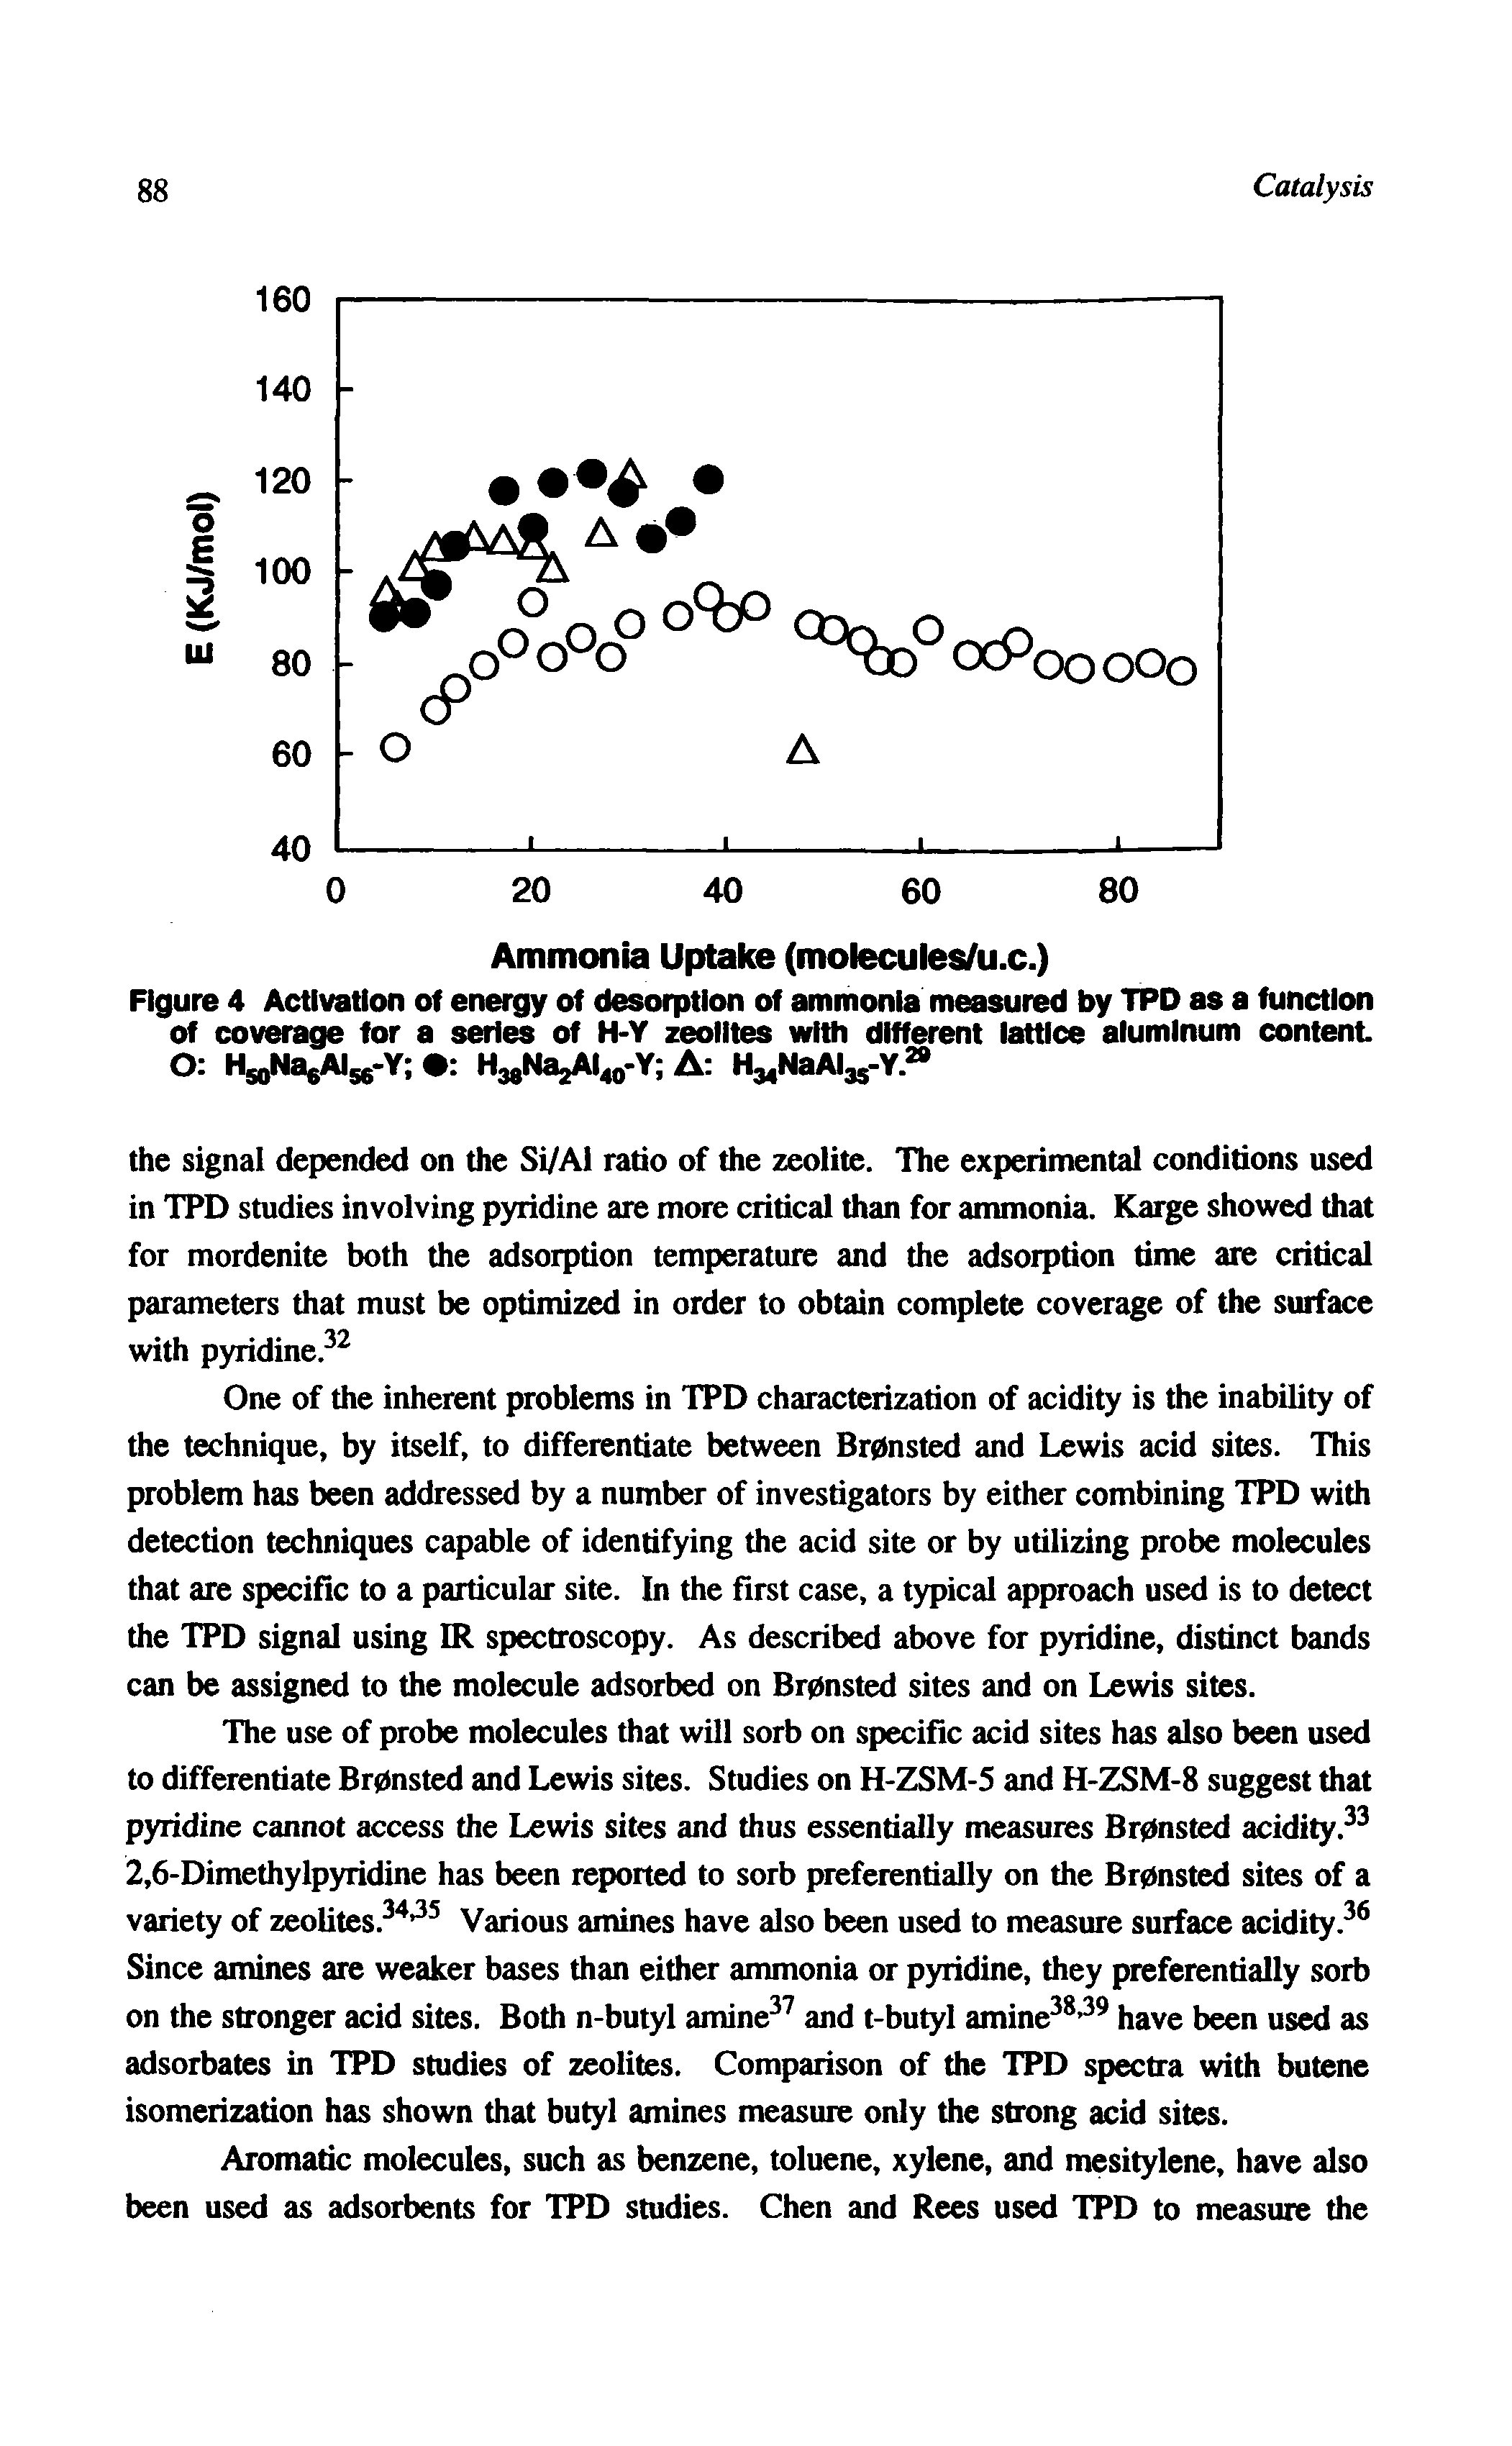 Figure 4 Activation of energy of desorption of ammonia measured by TPD as a function of coverage for a series of H-Y zeoiites with different iattice aiuminum content O HjoNasAise-Y H3,tte2Ai4o-Y A Hj NaAias-Y."...